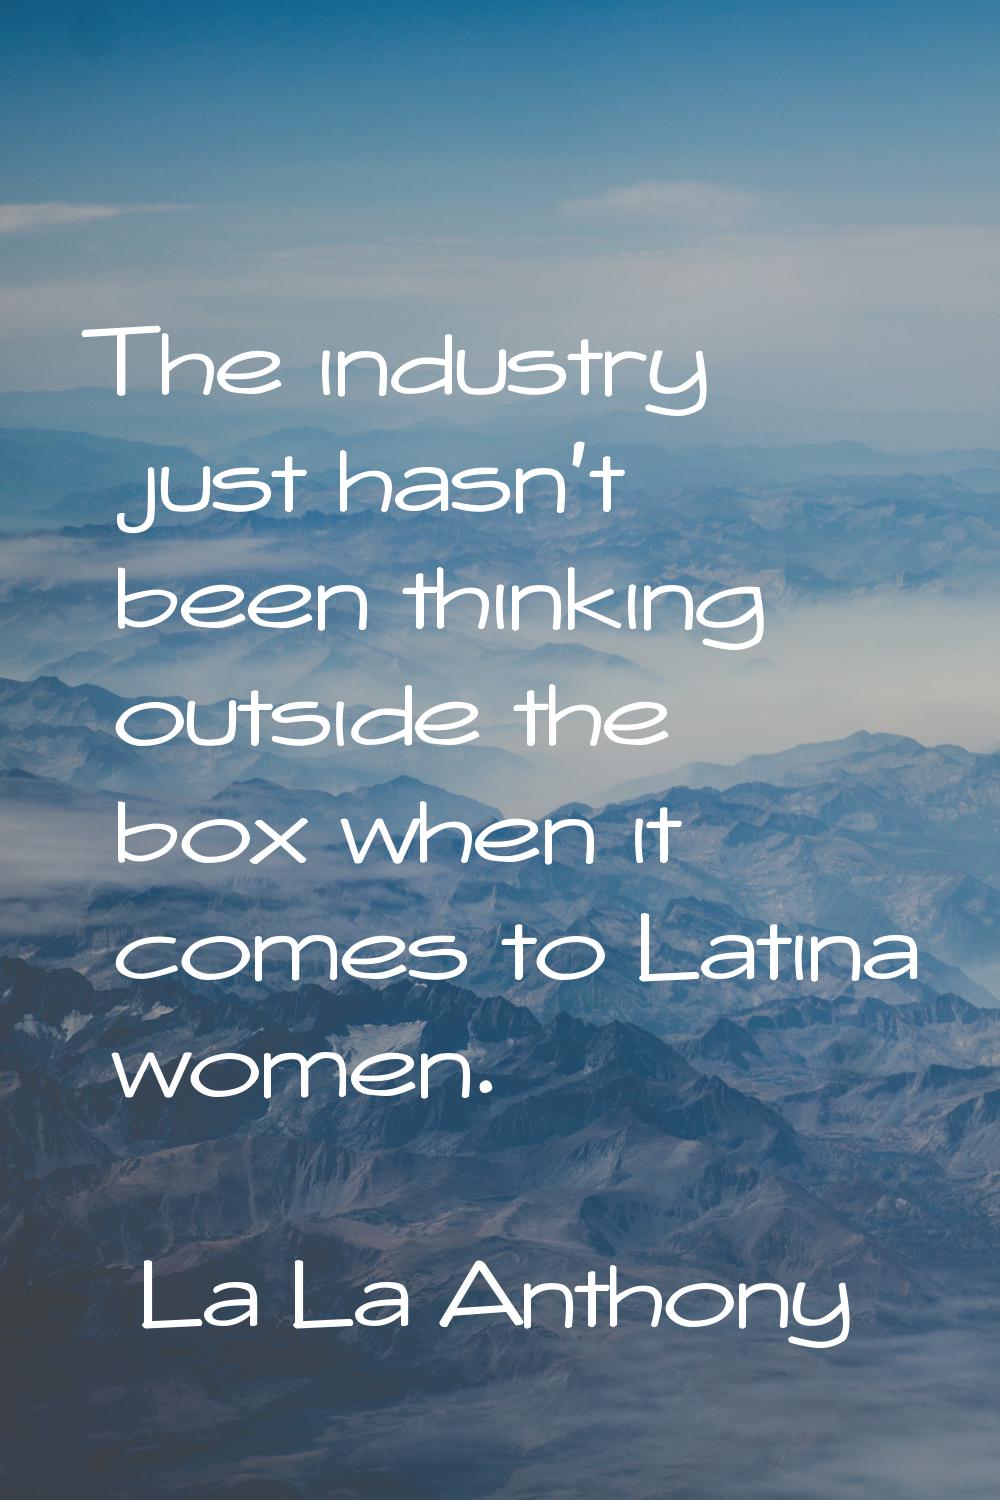 The industry just hasn't been thinking outside the box when it comes to Latina women.